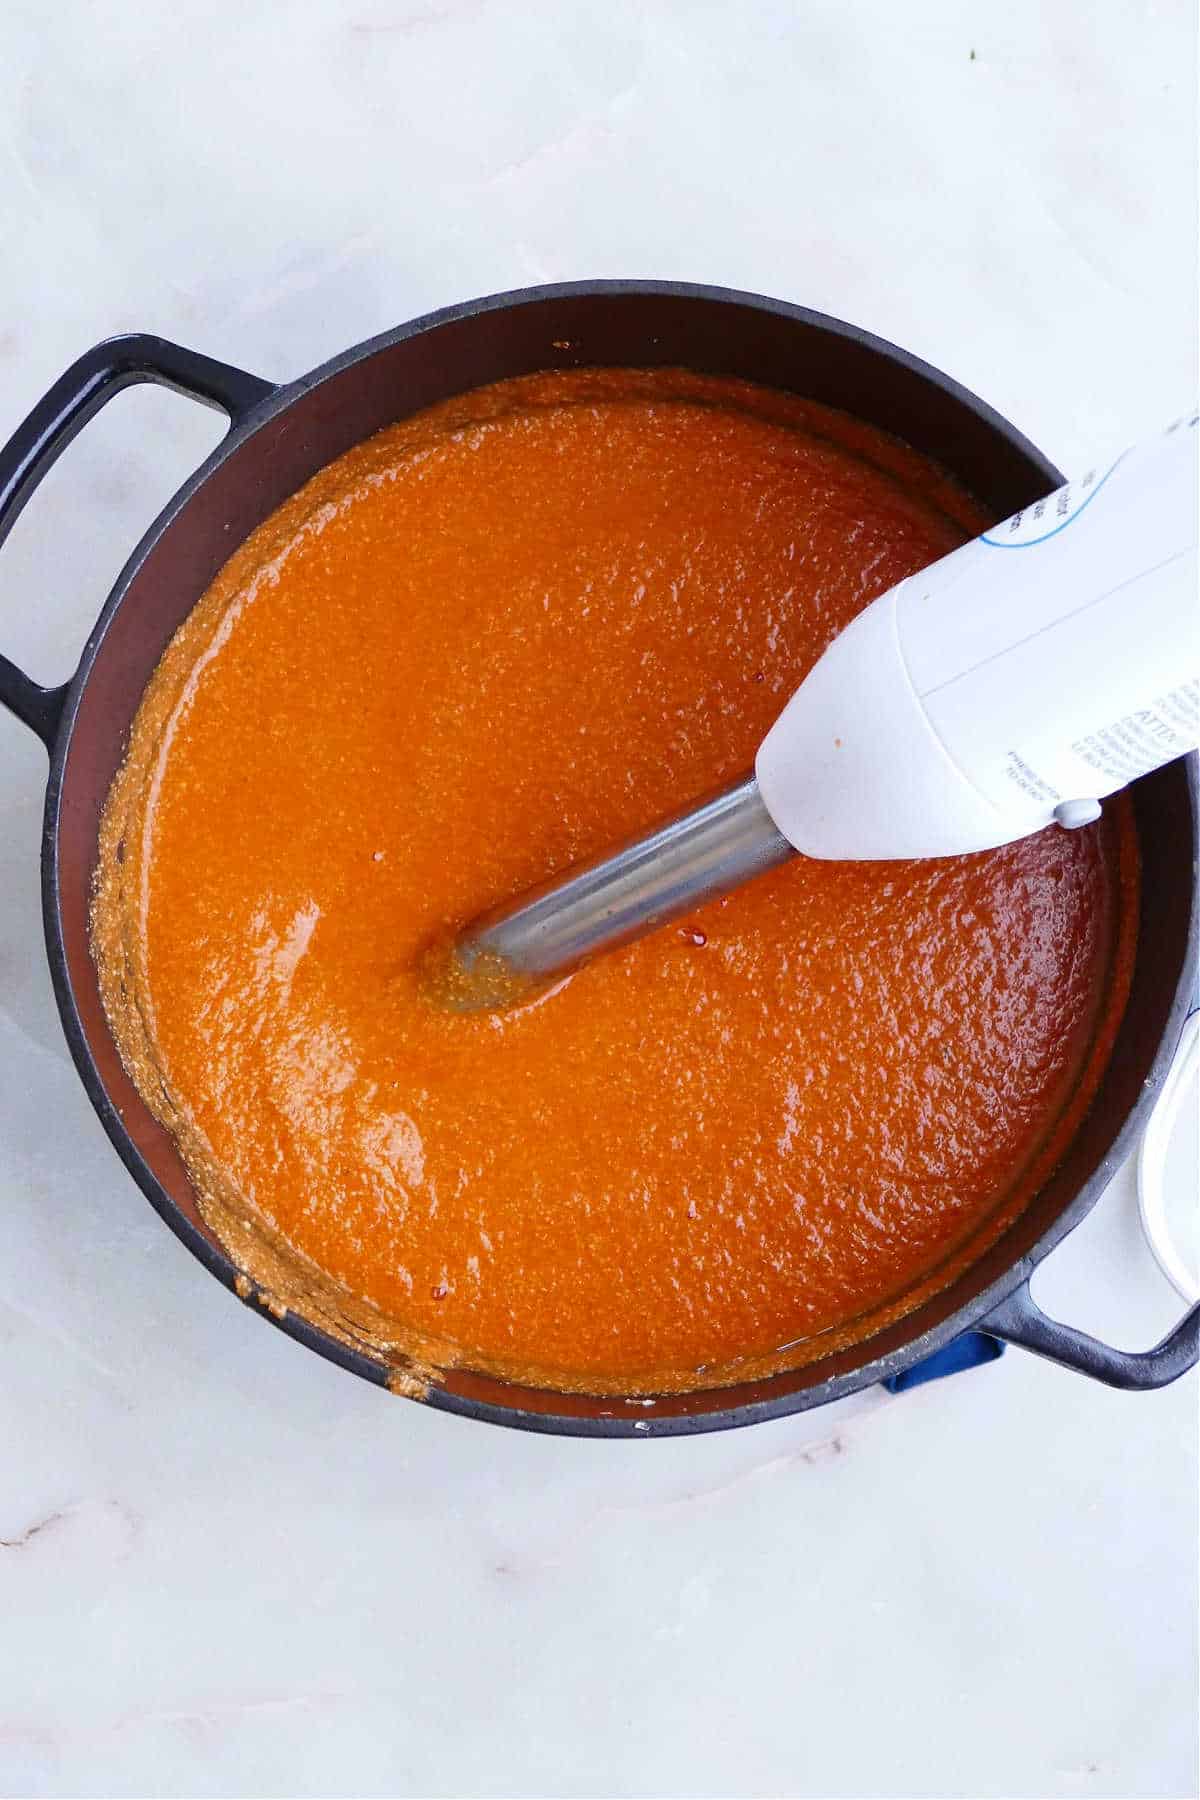 vegan tomato bisque being blended with an immersion blender in a large soup pot